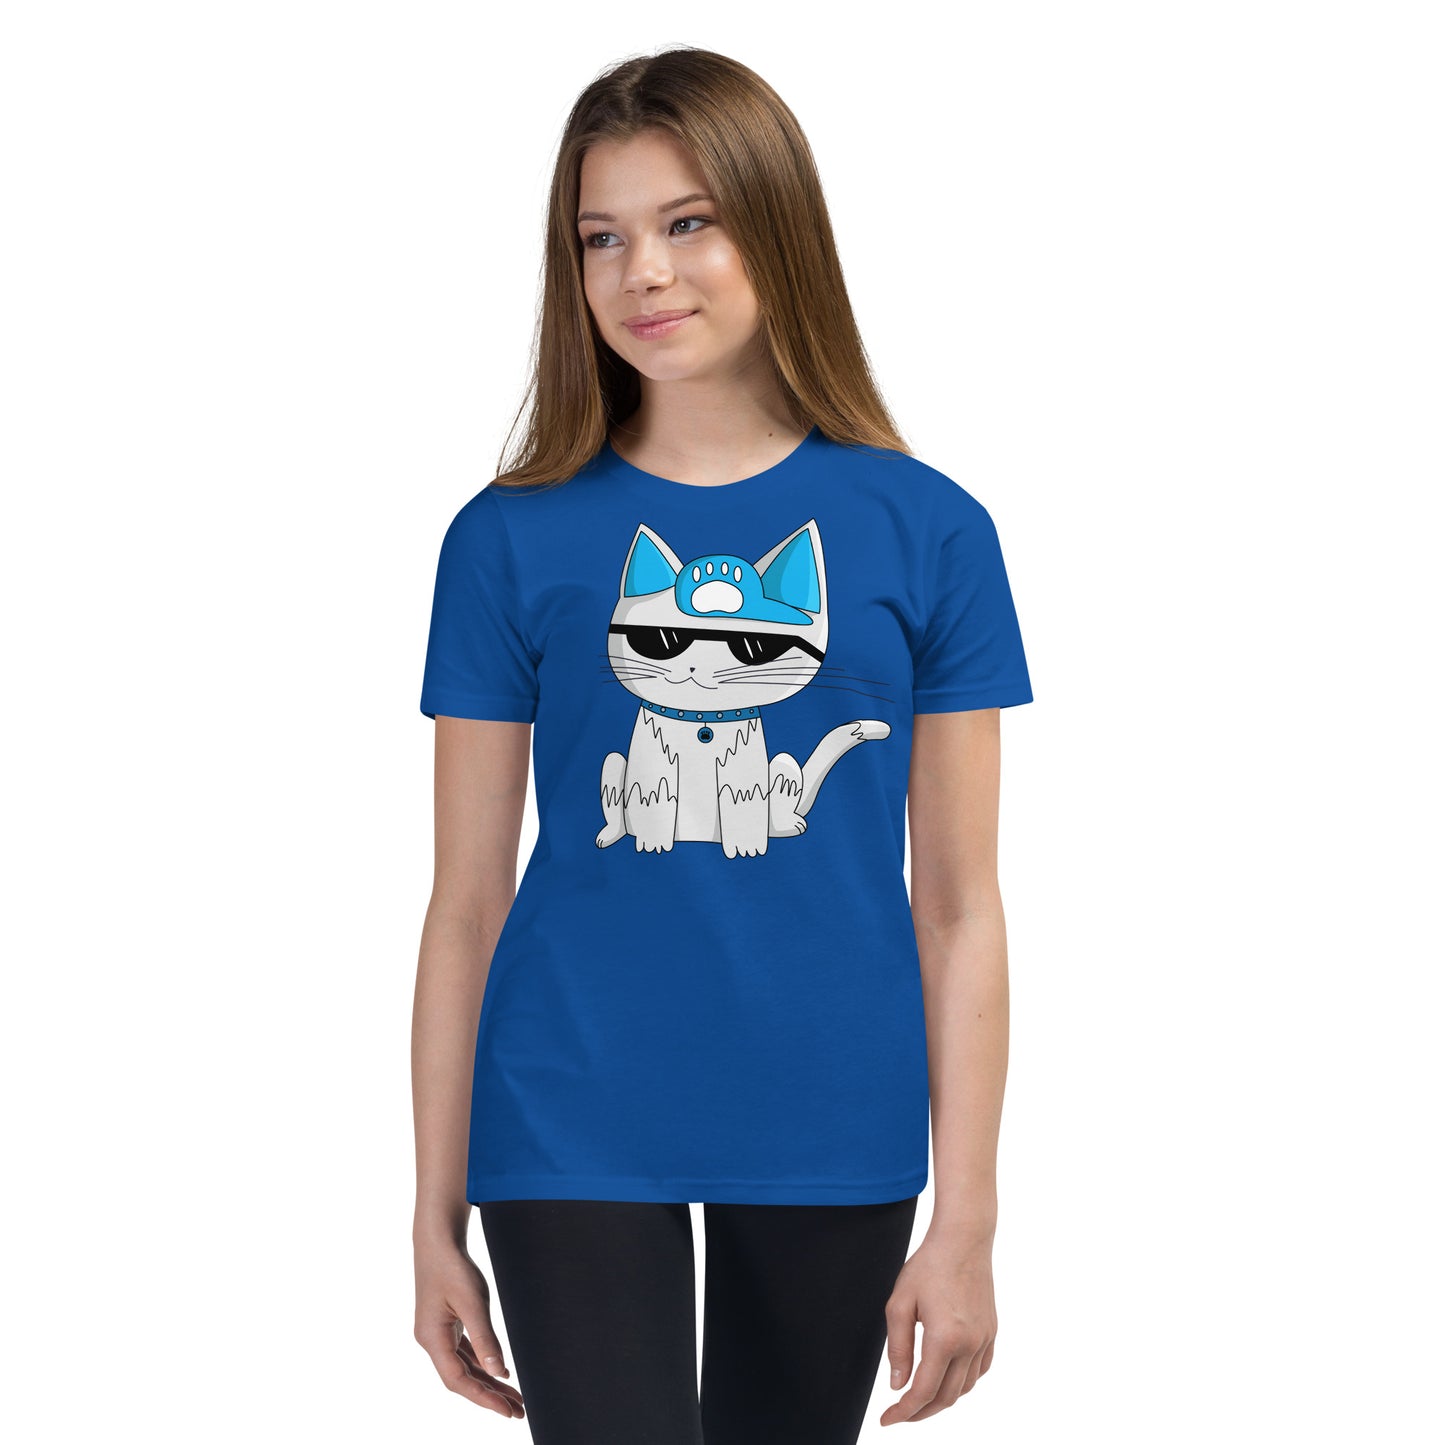 Cool Cat - Ami's Cats Youth Short Sleeve T-Shirt